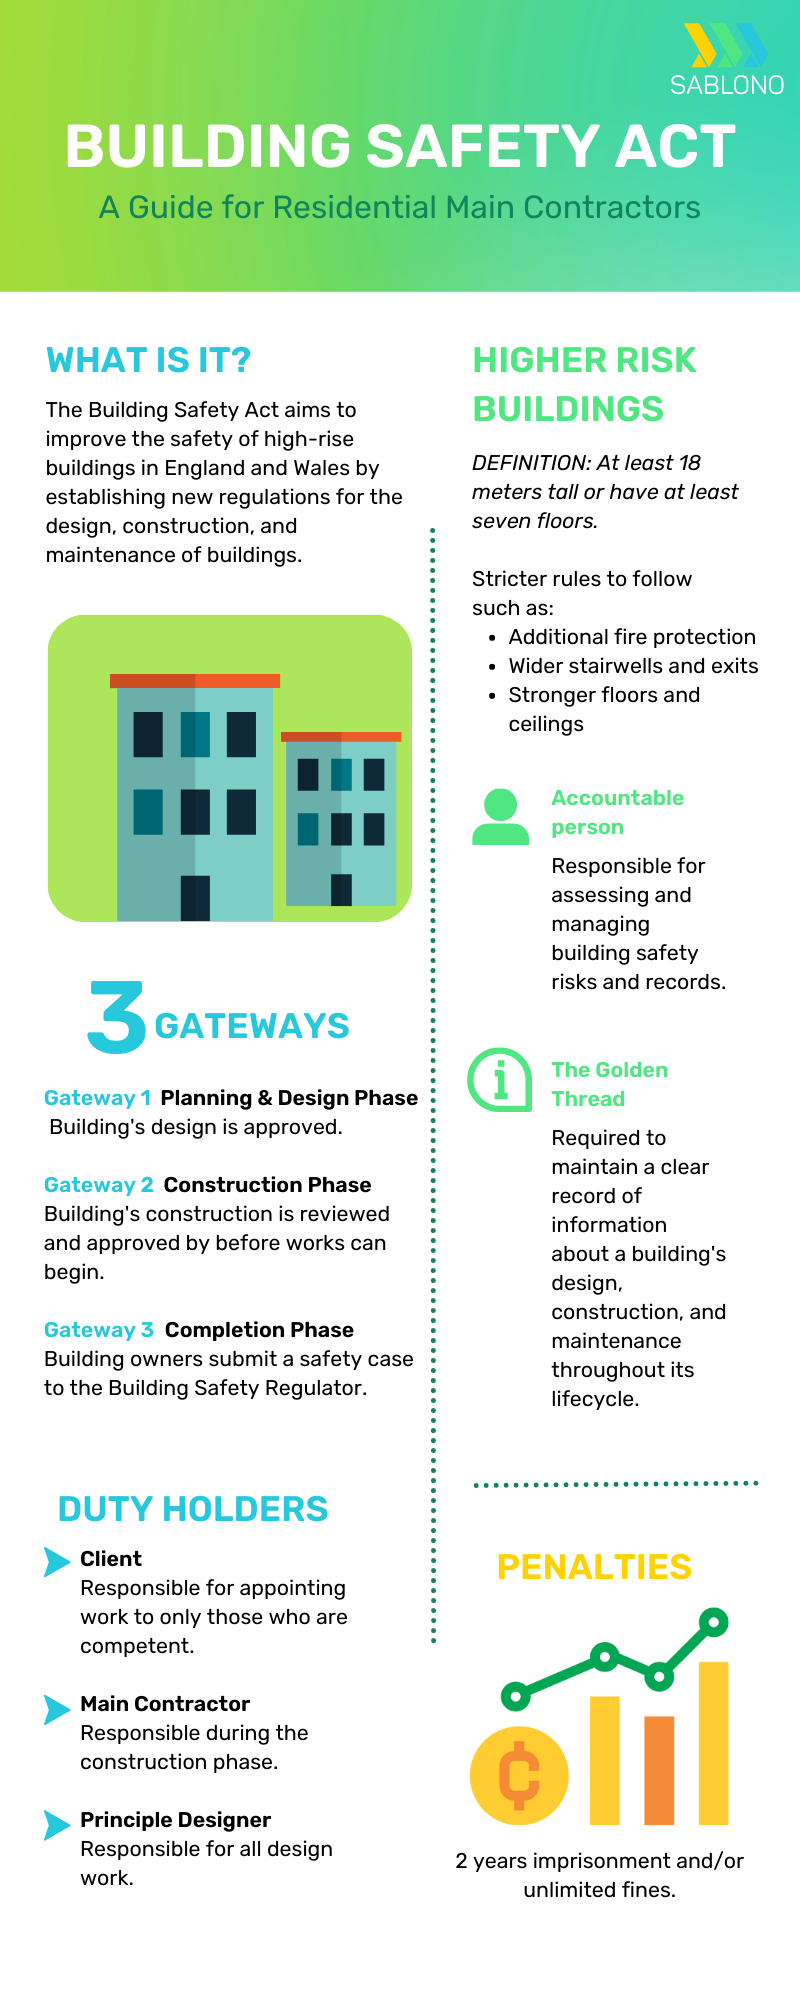 Sablono Building Safety Act Infographic - updated